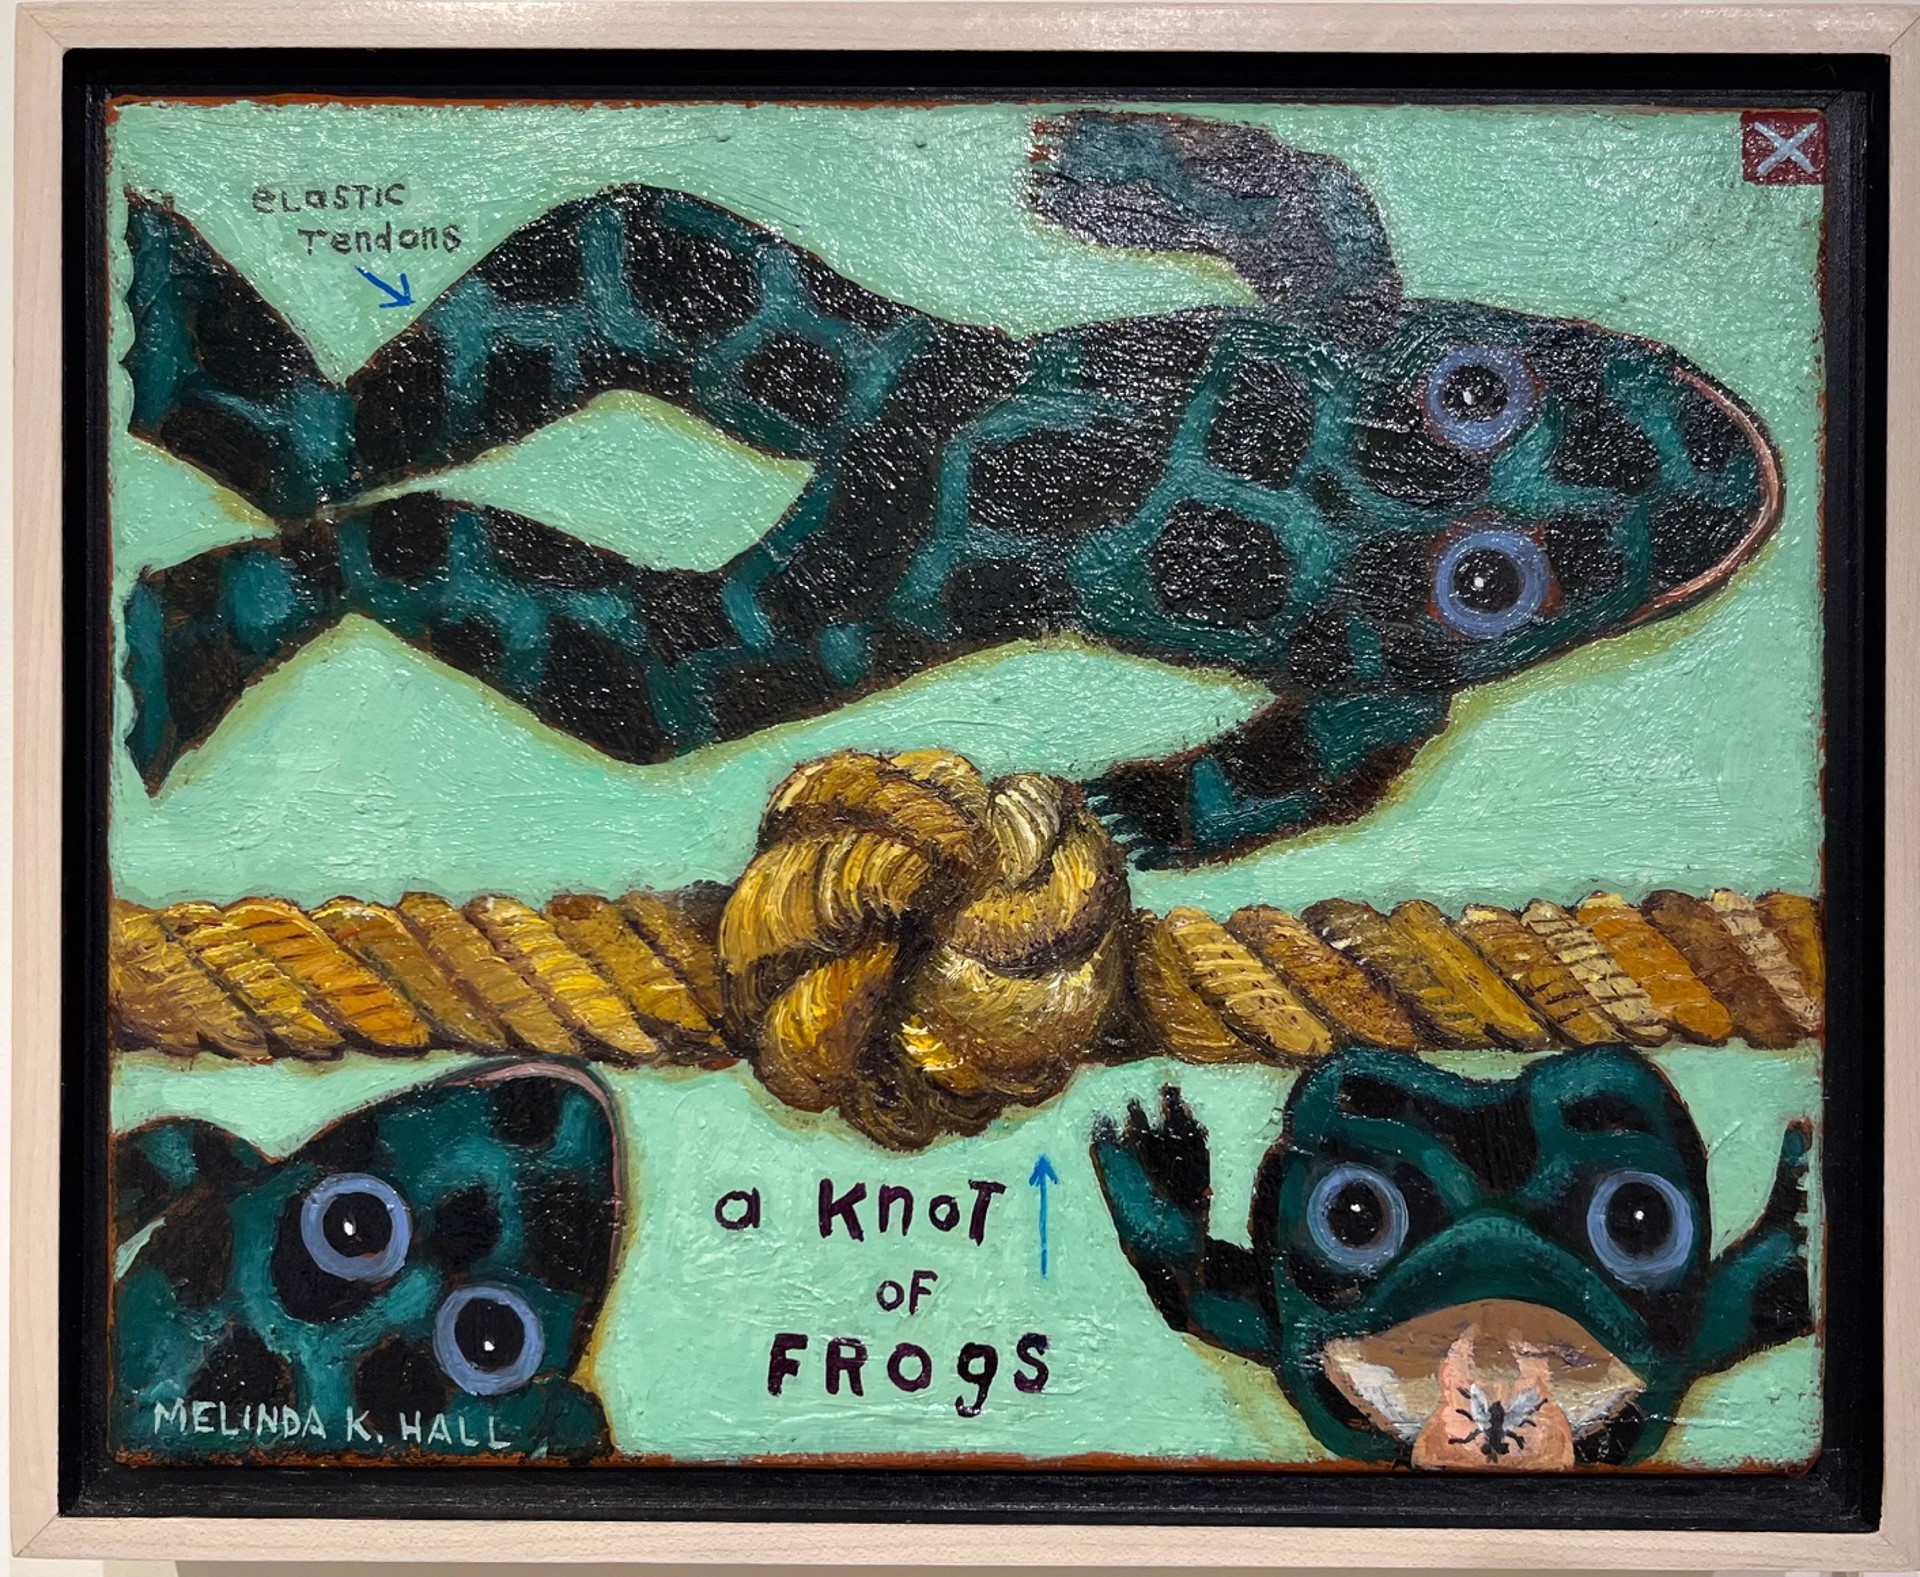 A Knot of Frogs by Melinda K. Hall